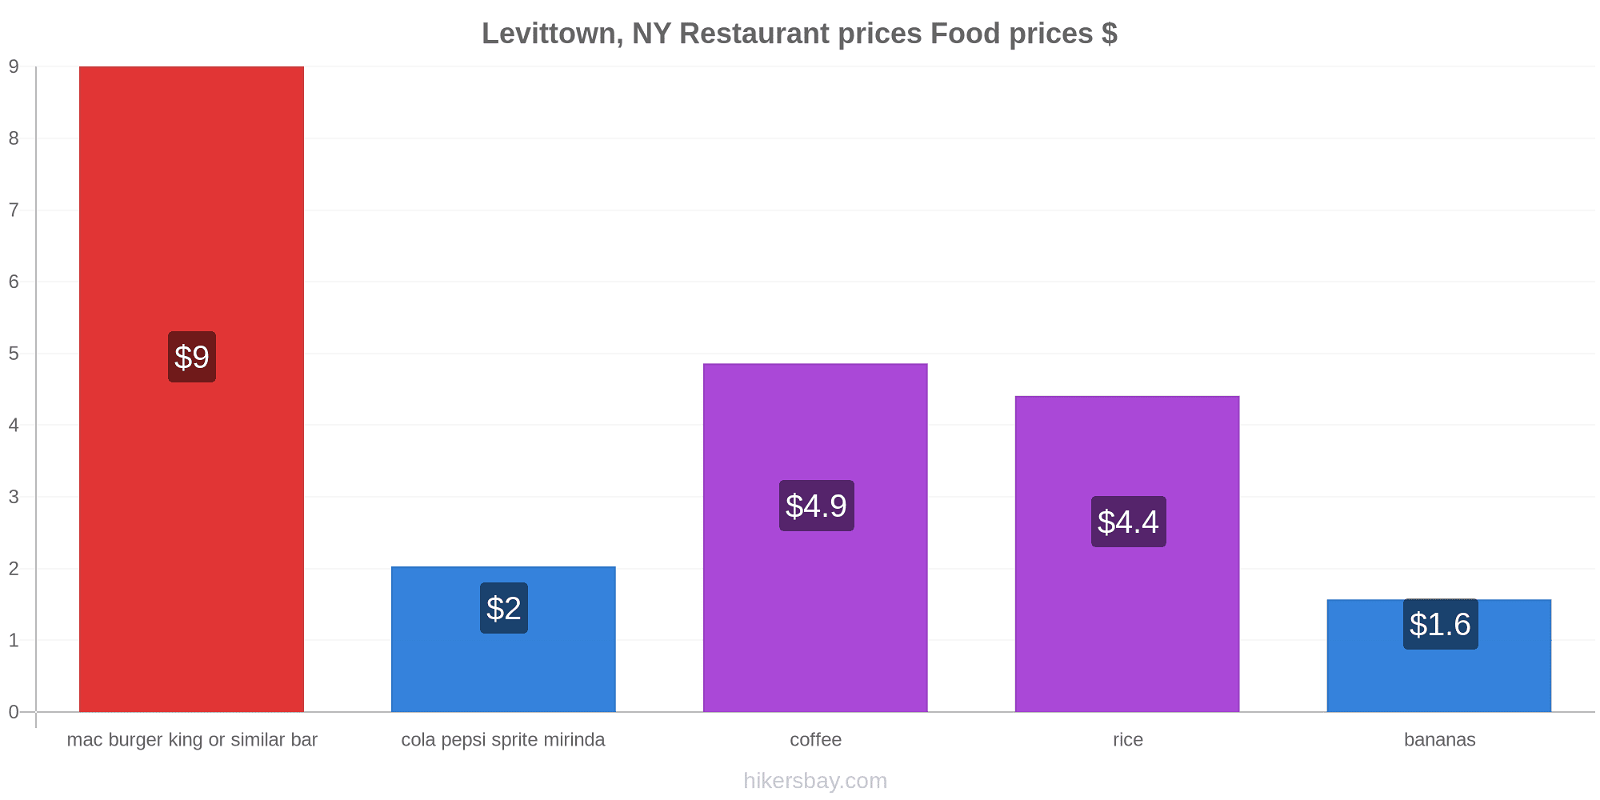 Levittown, NY price changes hikersbay.com